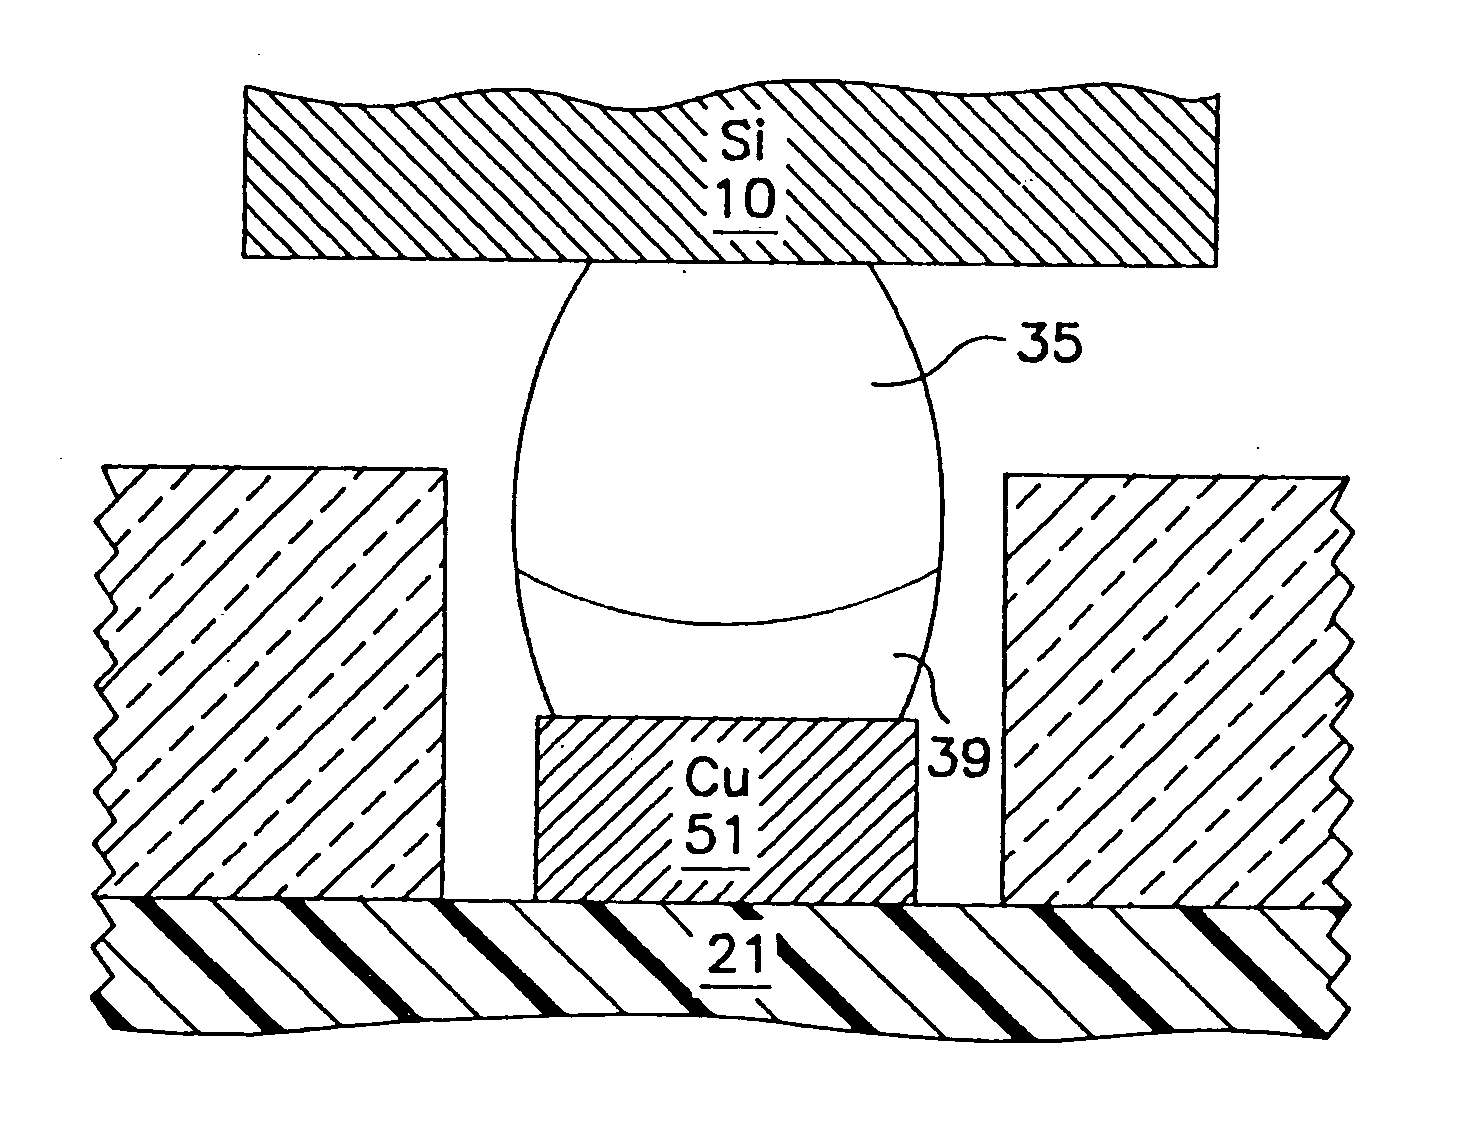 Low temperature solder chip attach structure and process to produce a high temperature interconnection